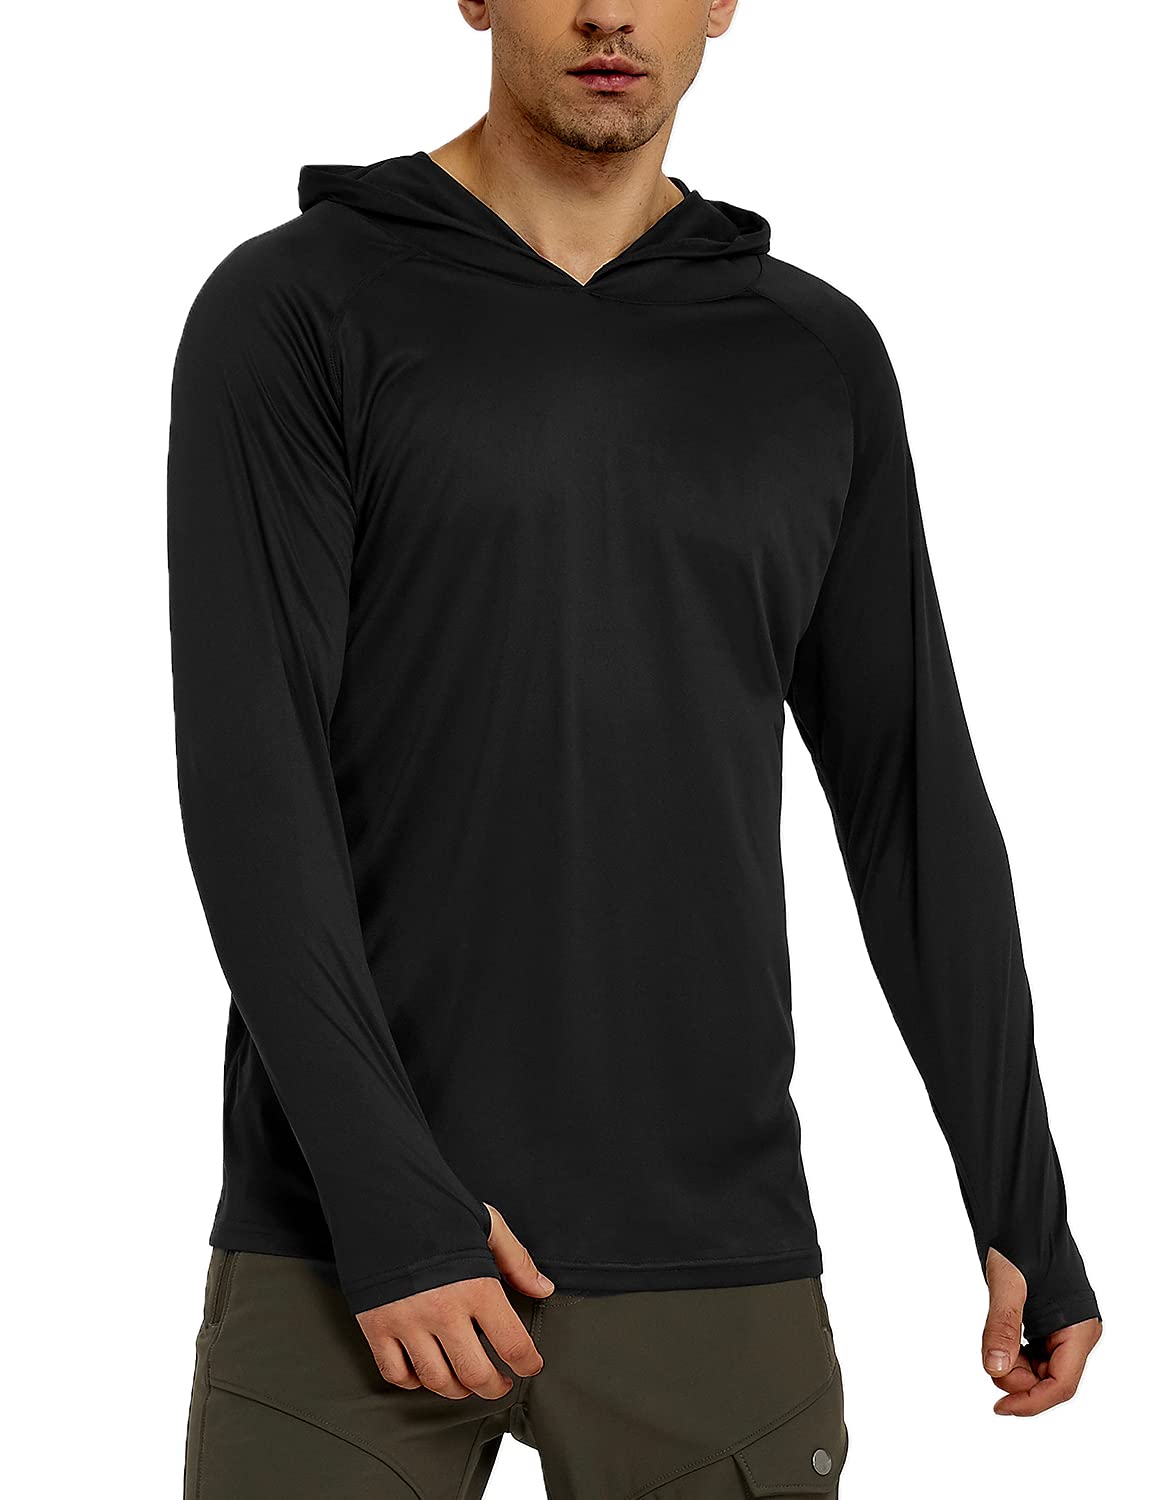 Safort Men's UPF 50+ Sun Protection Hoodie with Pocket Long Sleeve